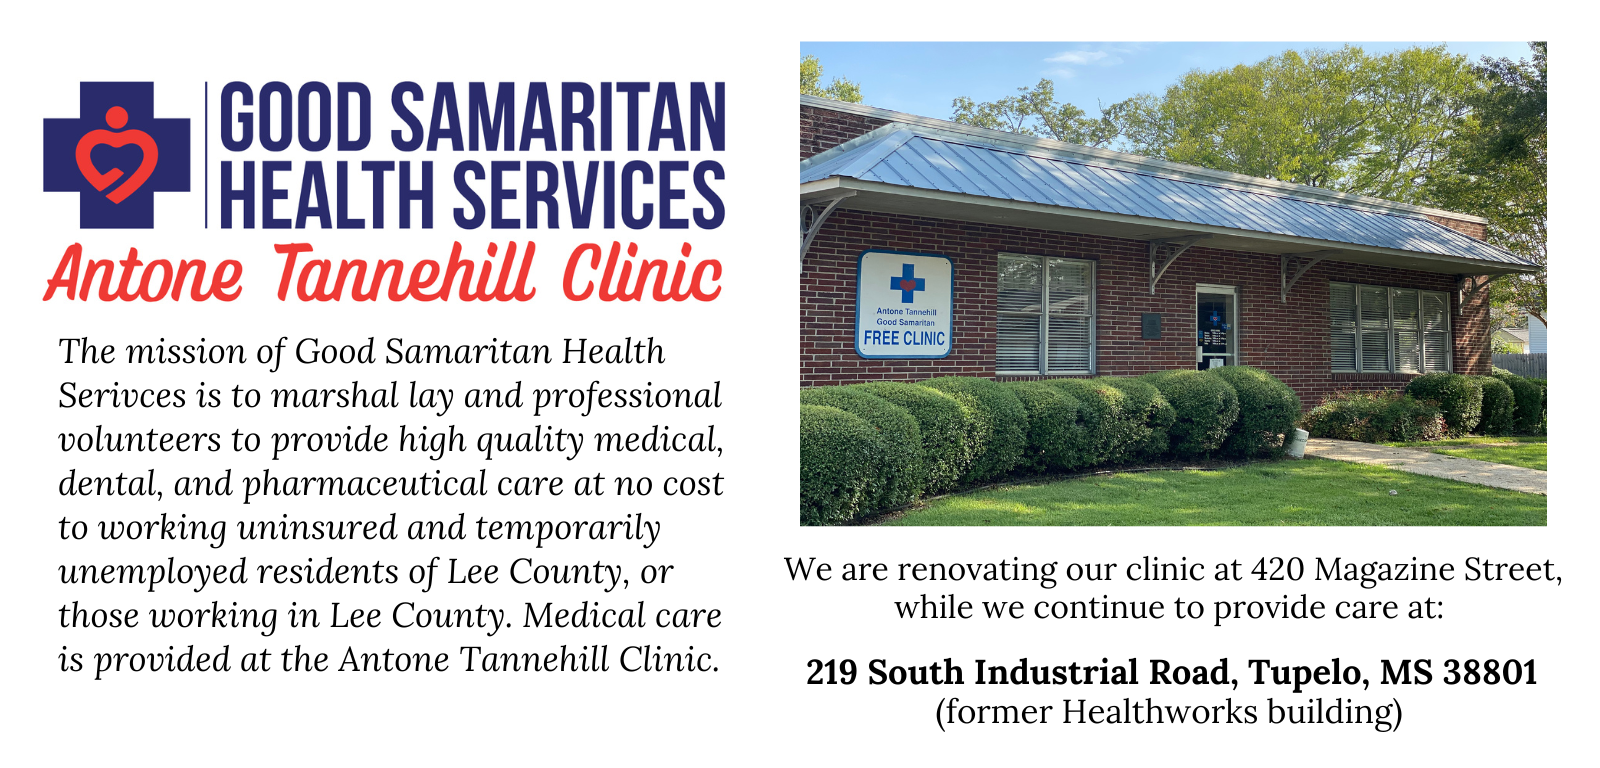 Good Samaritan Health Services | Providing high quality medical, dental,  and pharmaceutical care to working, uninsured residents of Lee County.